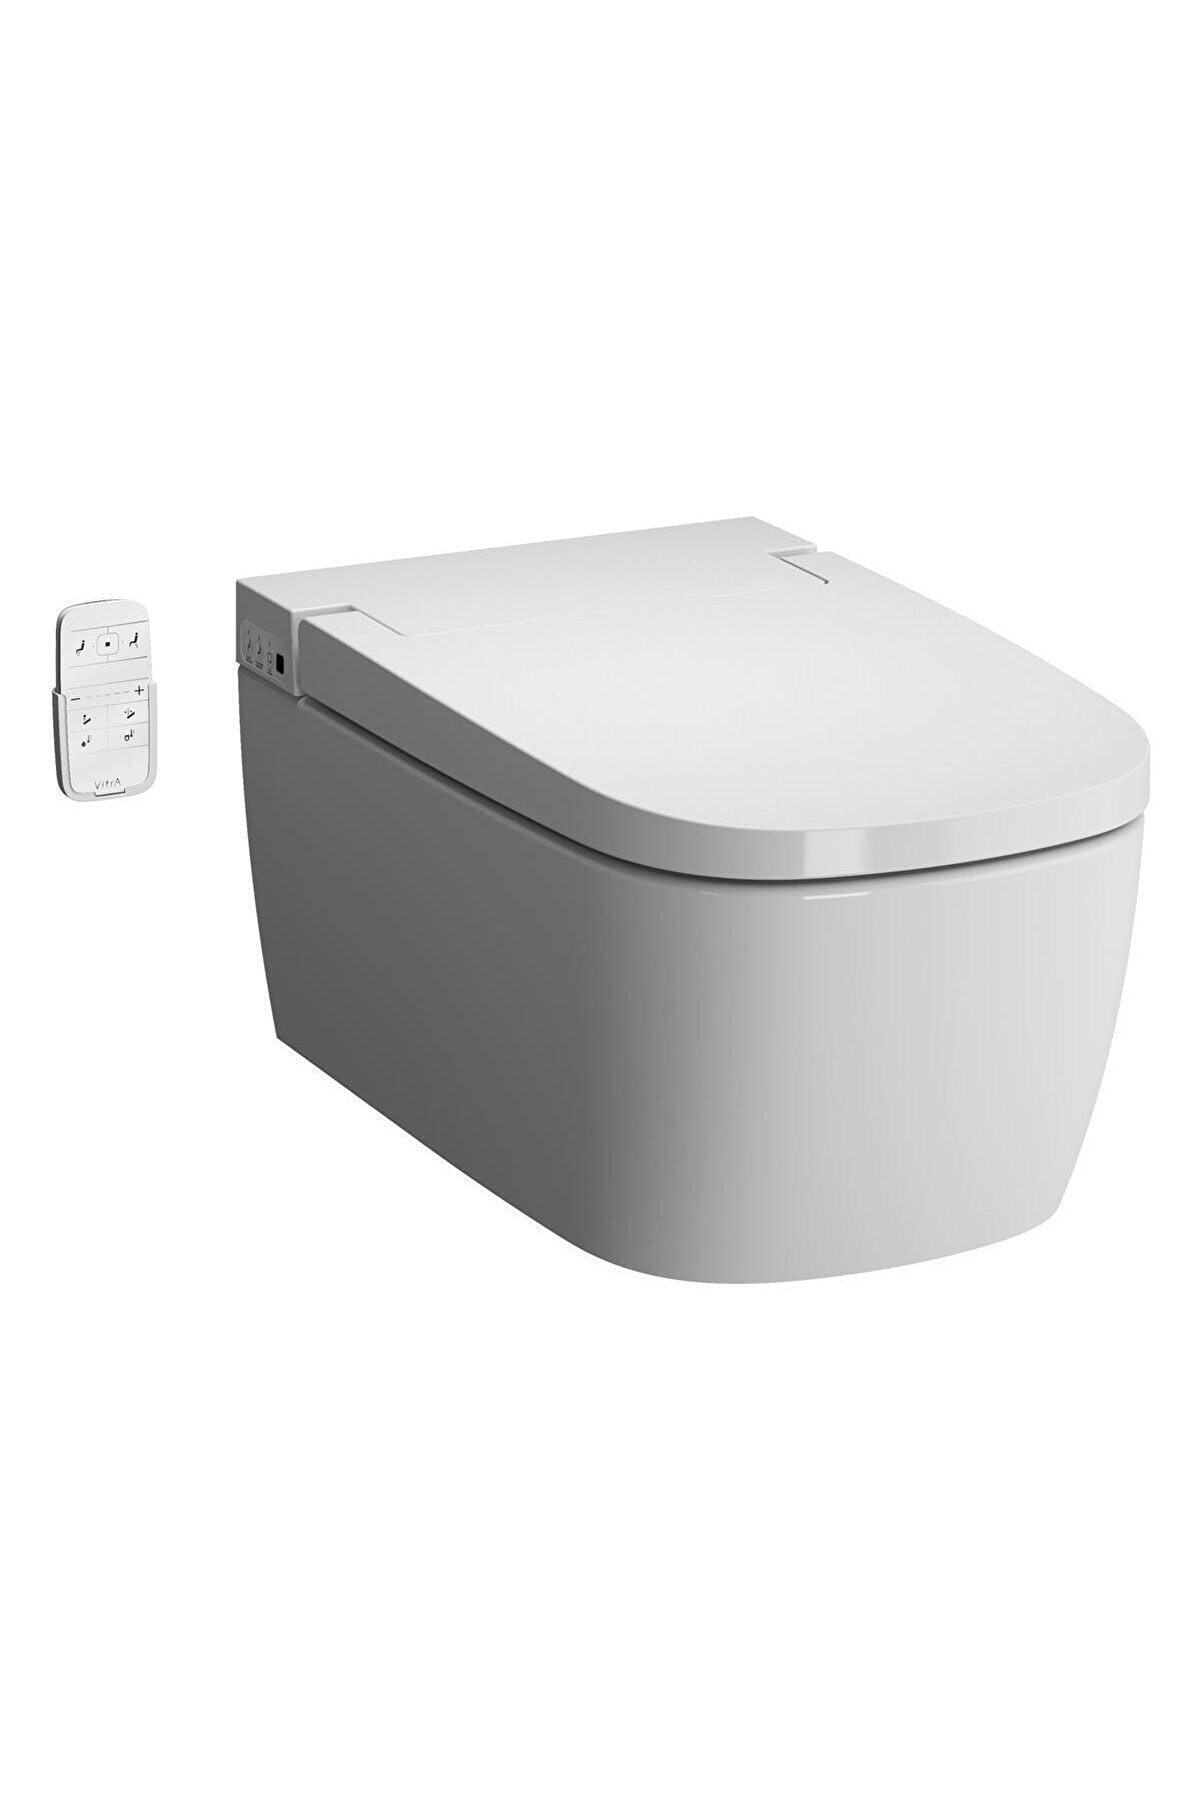 The V-Care is the new generation of shower toilet from VitrA. It